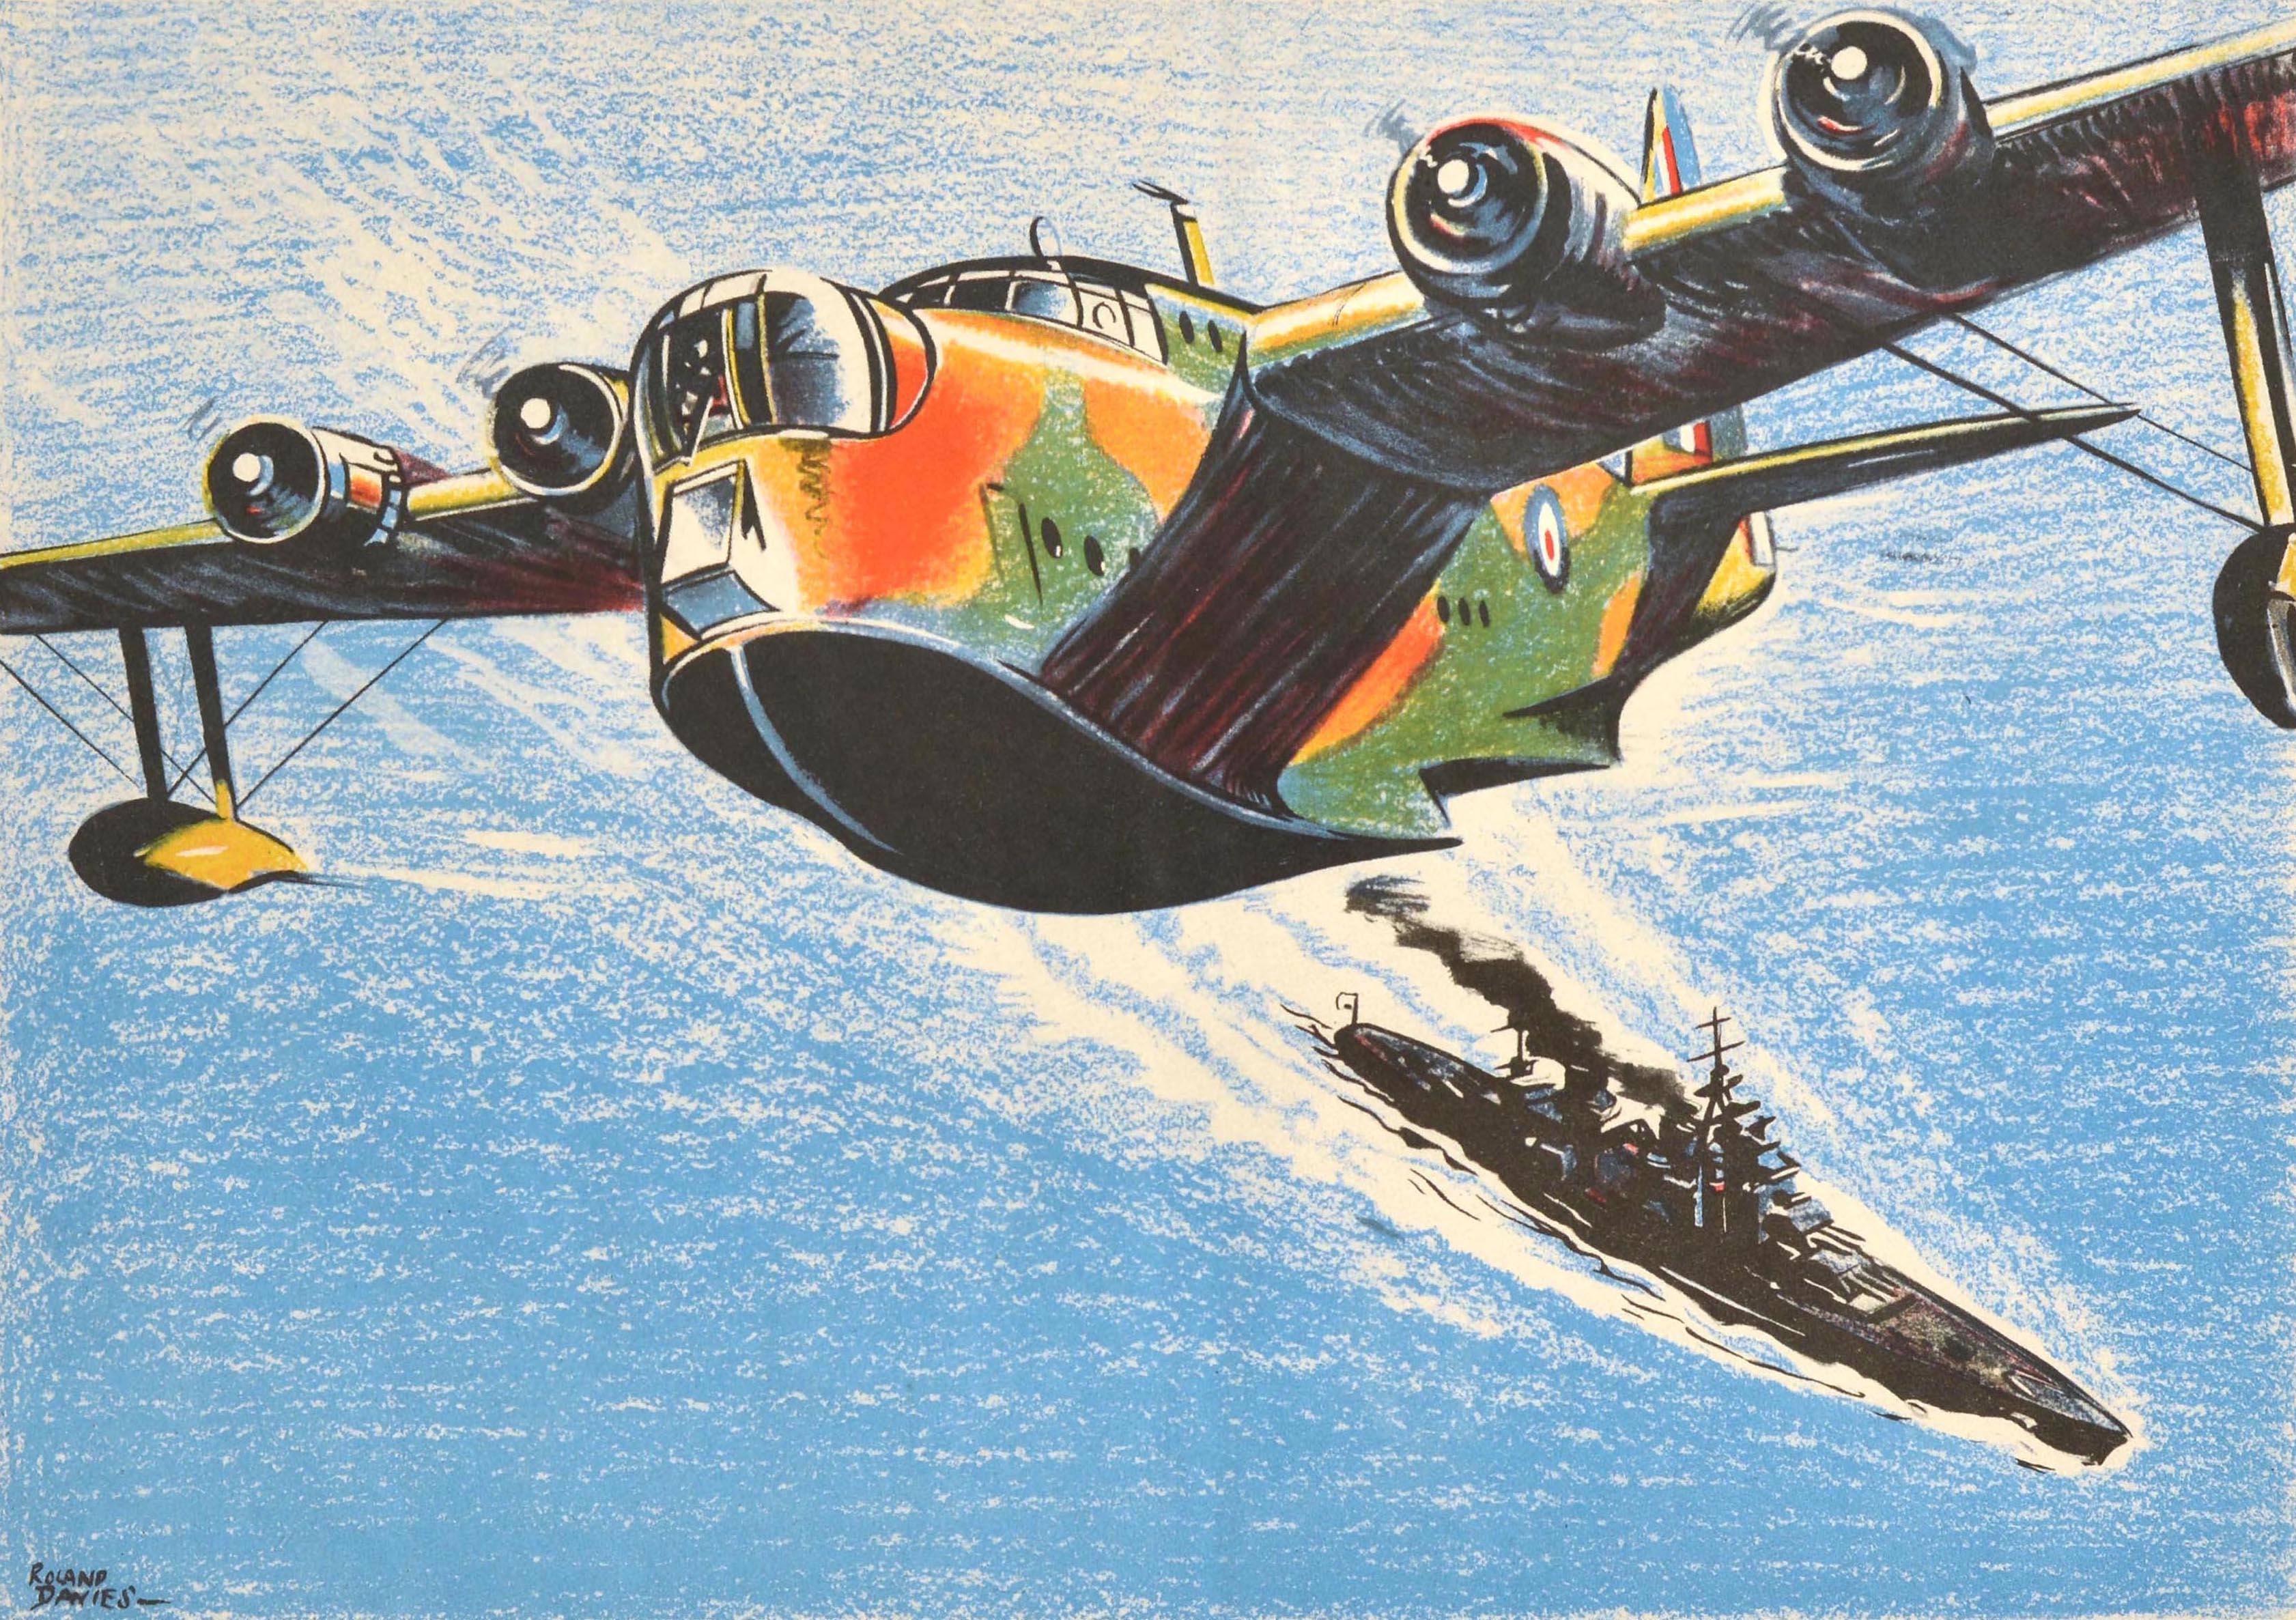 Original vintage World War Two poster - A British Short Sunderland Flying Boat patrolling the sea lanes - featuring an illustration of an RAF Royal Air Force bomber plane flying above a British Royal Navy war ship on the blue sea background, the